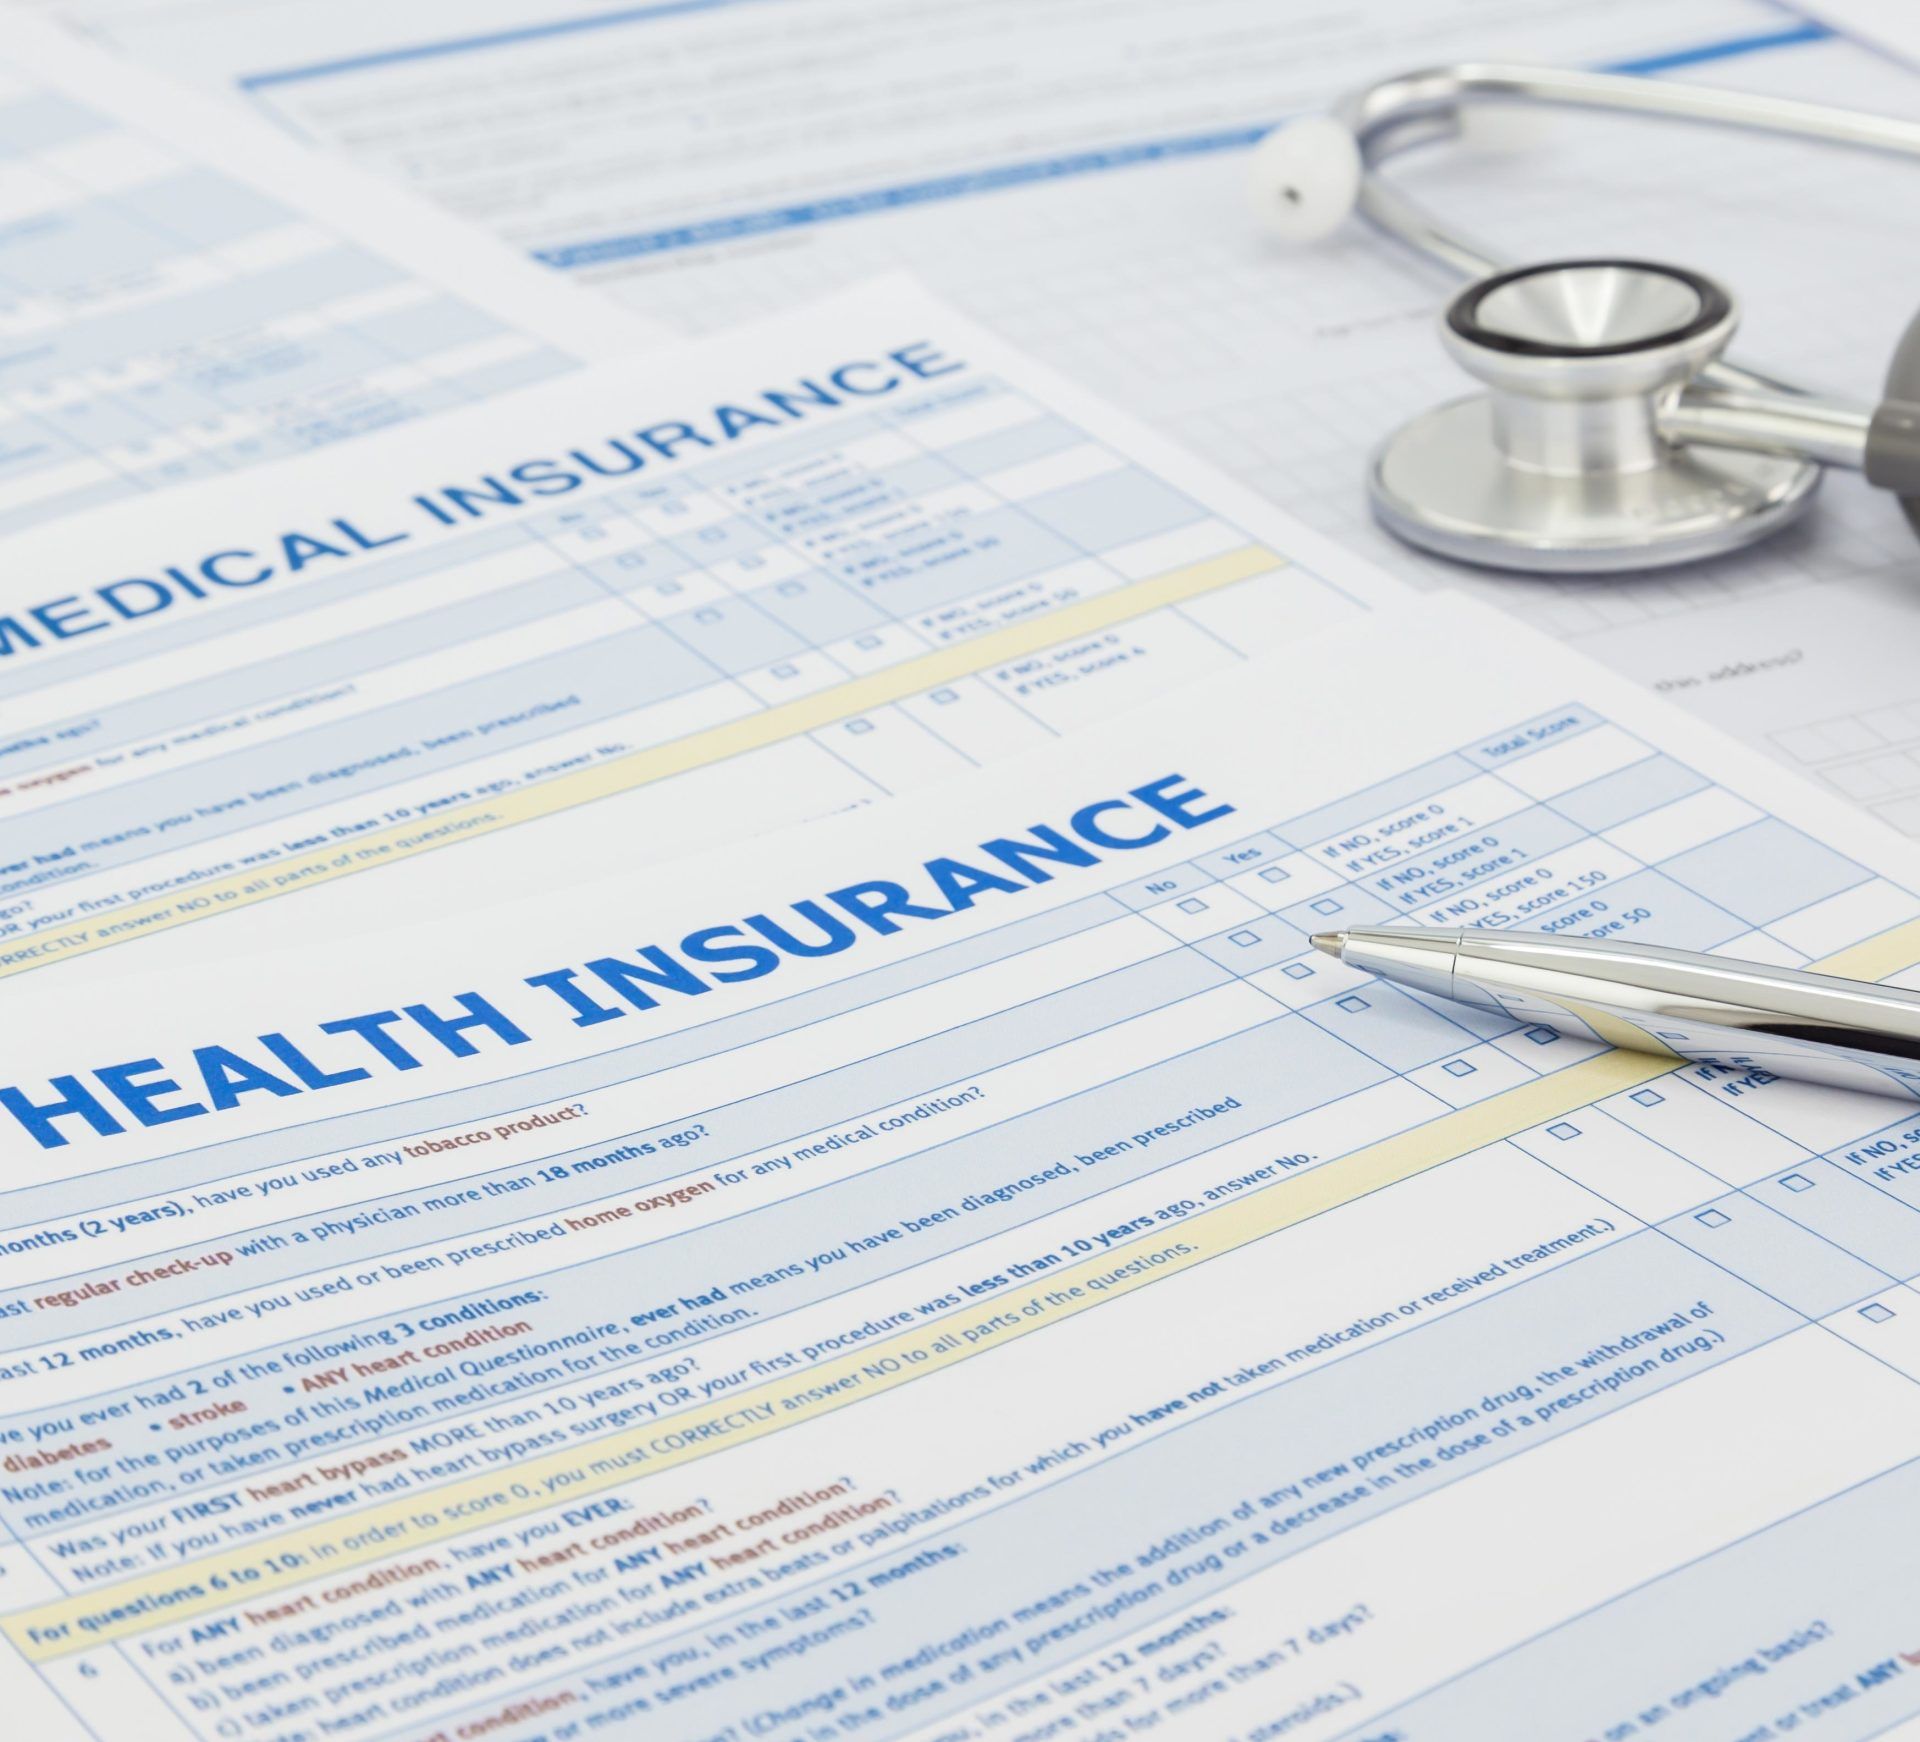 Insurance — Health Insurance with Stethoscope in New Port Richey, FL